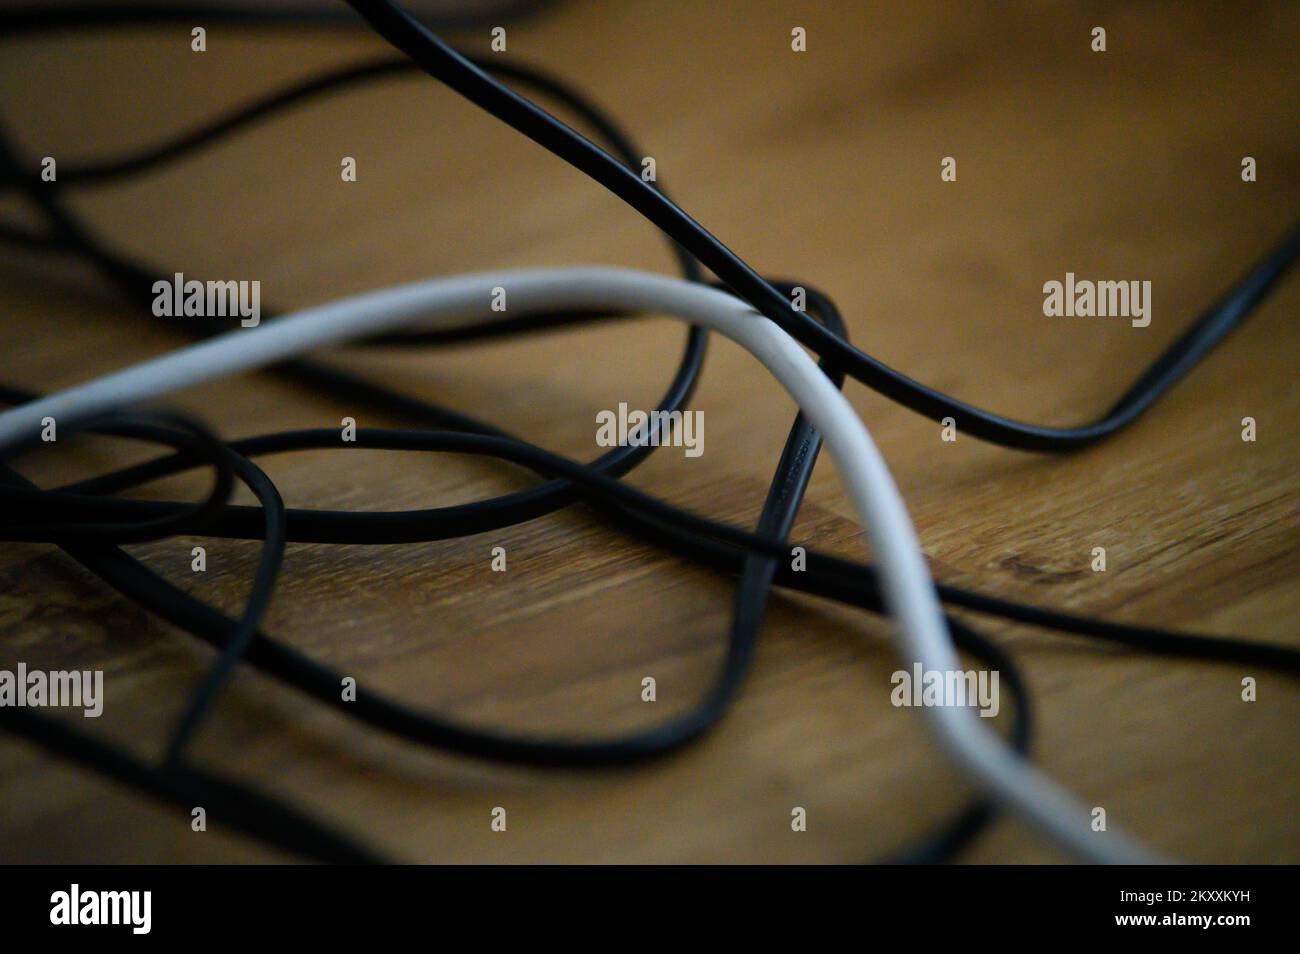 Cable chaos clutter from multiple electric wire extension cords and multi-contact plugs on wooden floor or table background Stock Photo